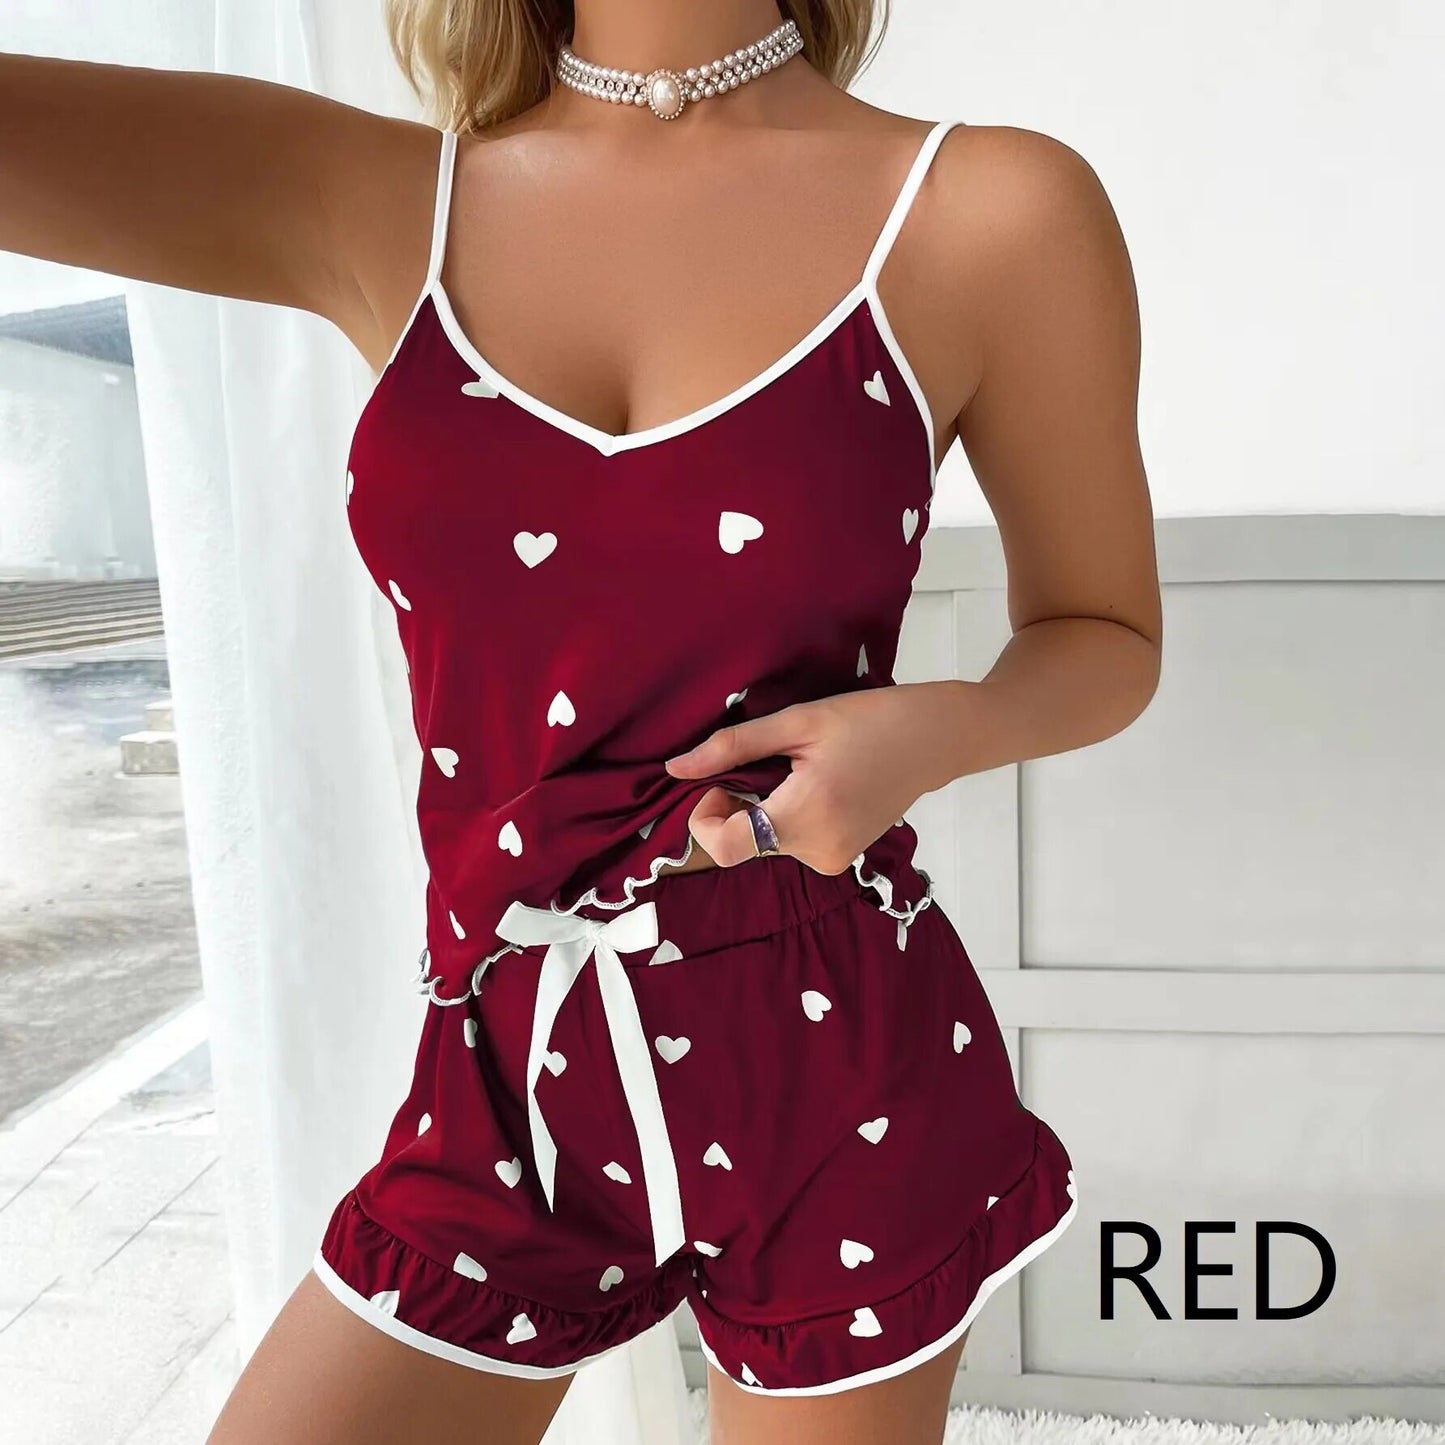 Women's Sexy Low-Cut Pajama Set - Pink and Red Summer Sleepwear